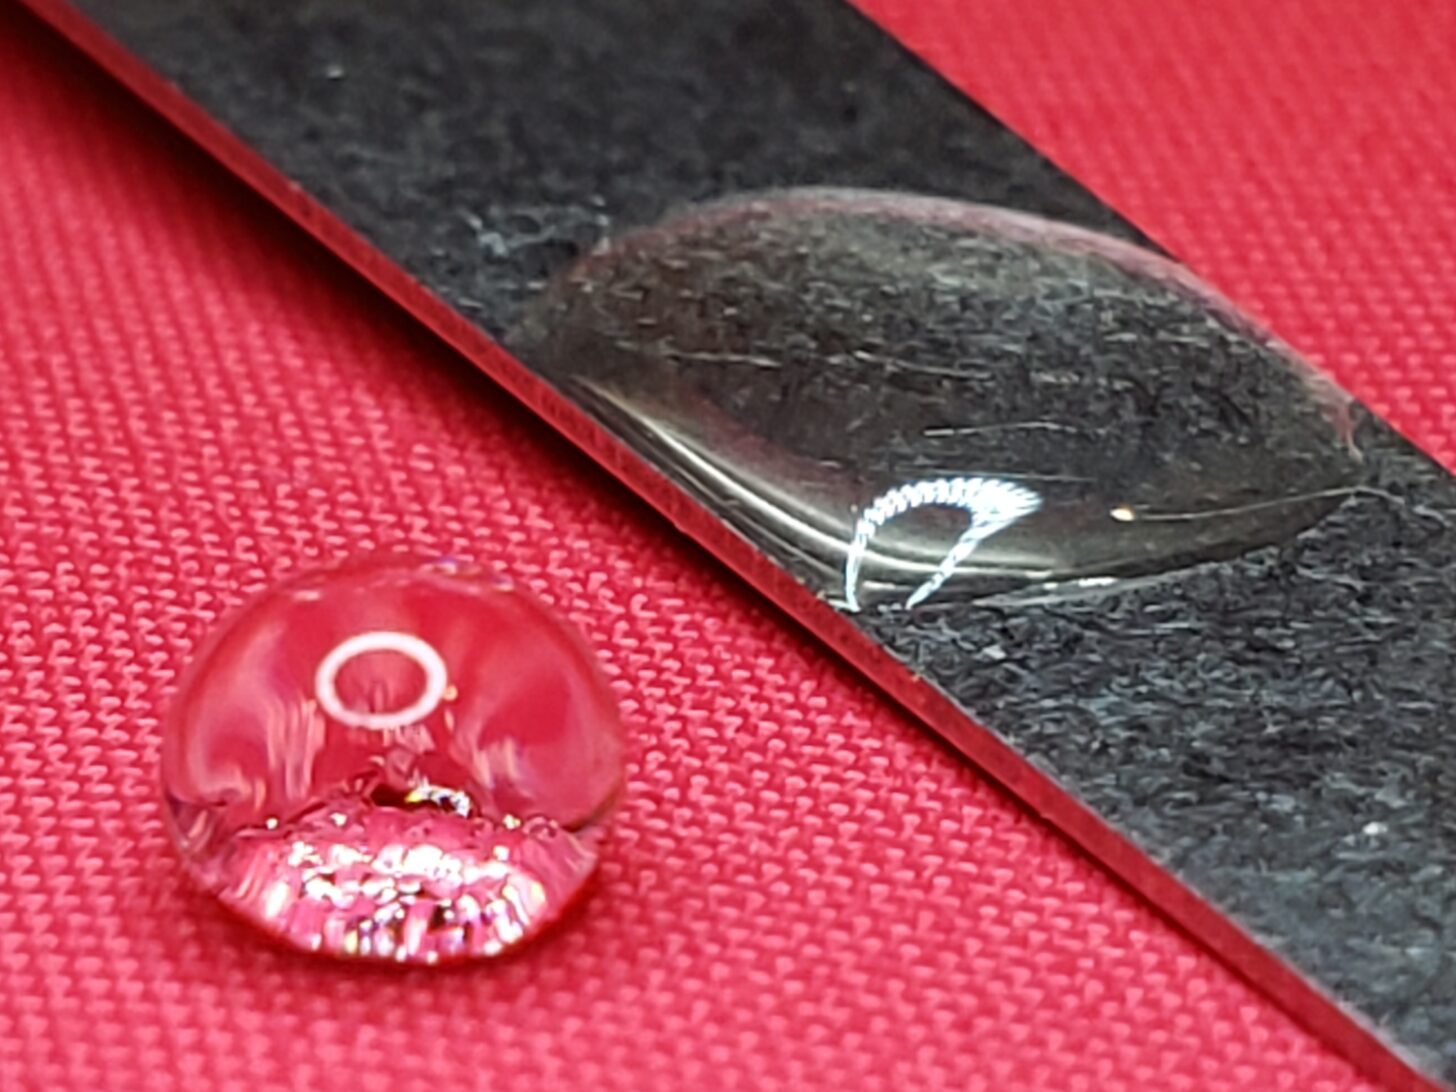 The red fabric is a Neoshell fabric. It is treated with DWR to render its surface highly hydrophobic. As a result, the left drop of water is nearly spherical. The contact angle, viewed at the bottom of the drop, is well over 90°. The flattening at the bottom is due either to the force of gravity or a low level of adhesive force. One way to determine this is to invert the surface. If the drop remains attached, there is some adhesive force. If the drop slides off, the flattening is likely due to gravity. The right drop is visibly flat. The contact angle is very low, perhaps 20°. We can see that this surface is hydrophilic. The water molecules show a high level of adhesion to the metal surface. In fact, I flipped the metal strip upside down and the drop remained in place! If you think metal is necessarily hydrophobic, think again.